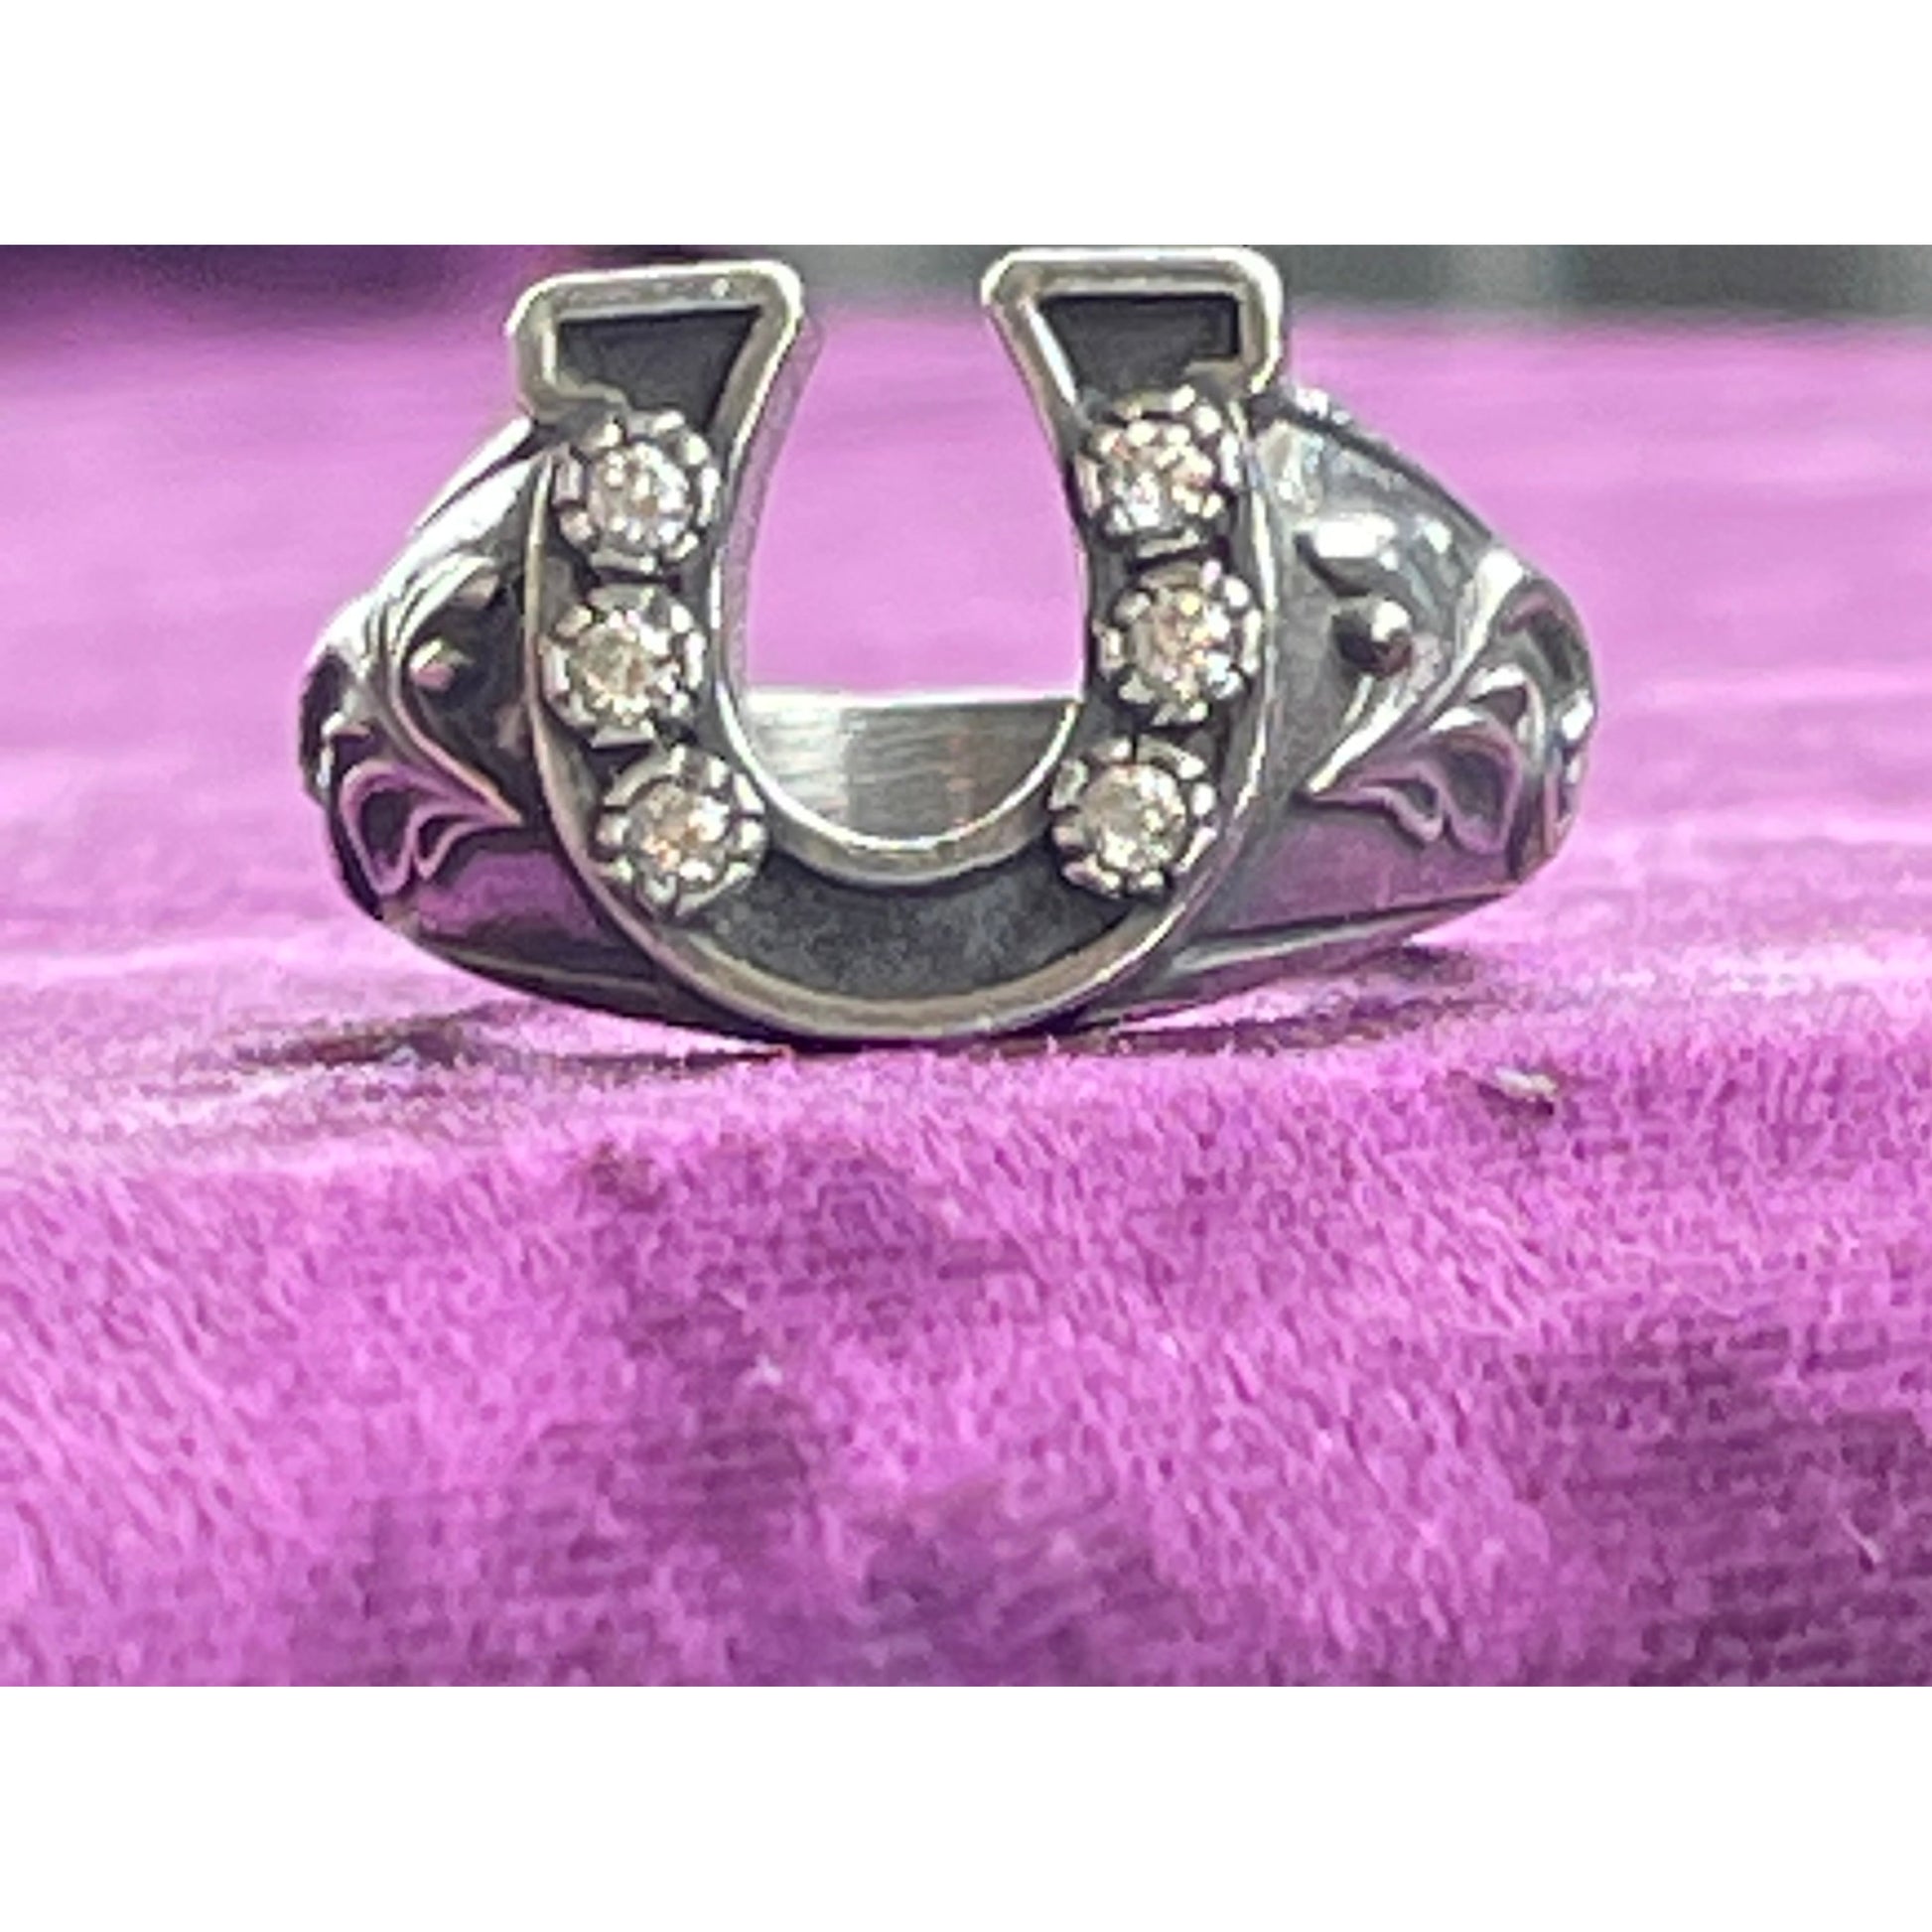 Custom sterling silver horseshoe ring set with cubic Zirconia stones along the horseshoe complimented by a beautiful scrolling on either side of the band. The band is slightly tapered for a very comfortable fit. 